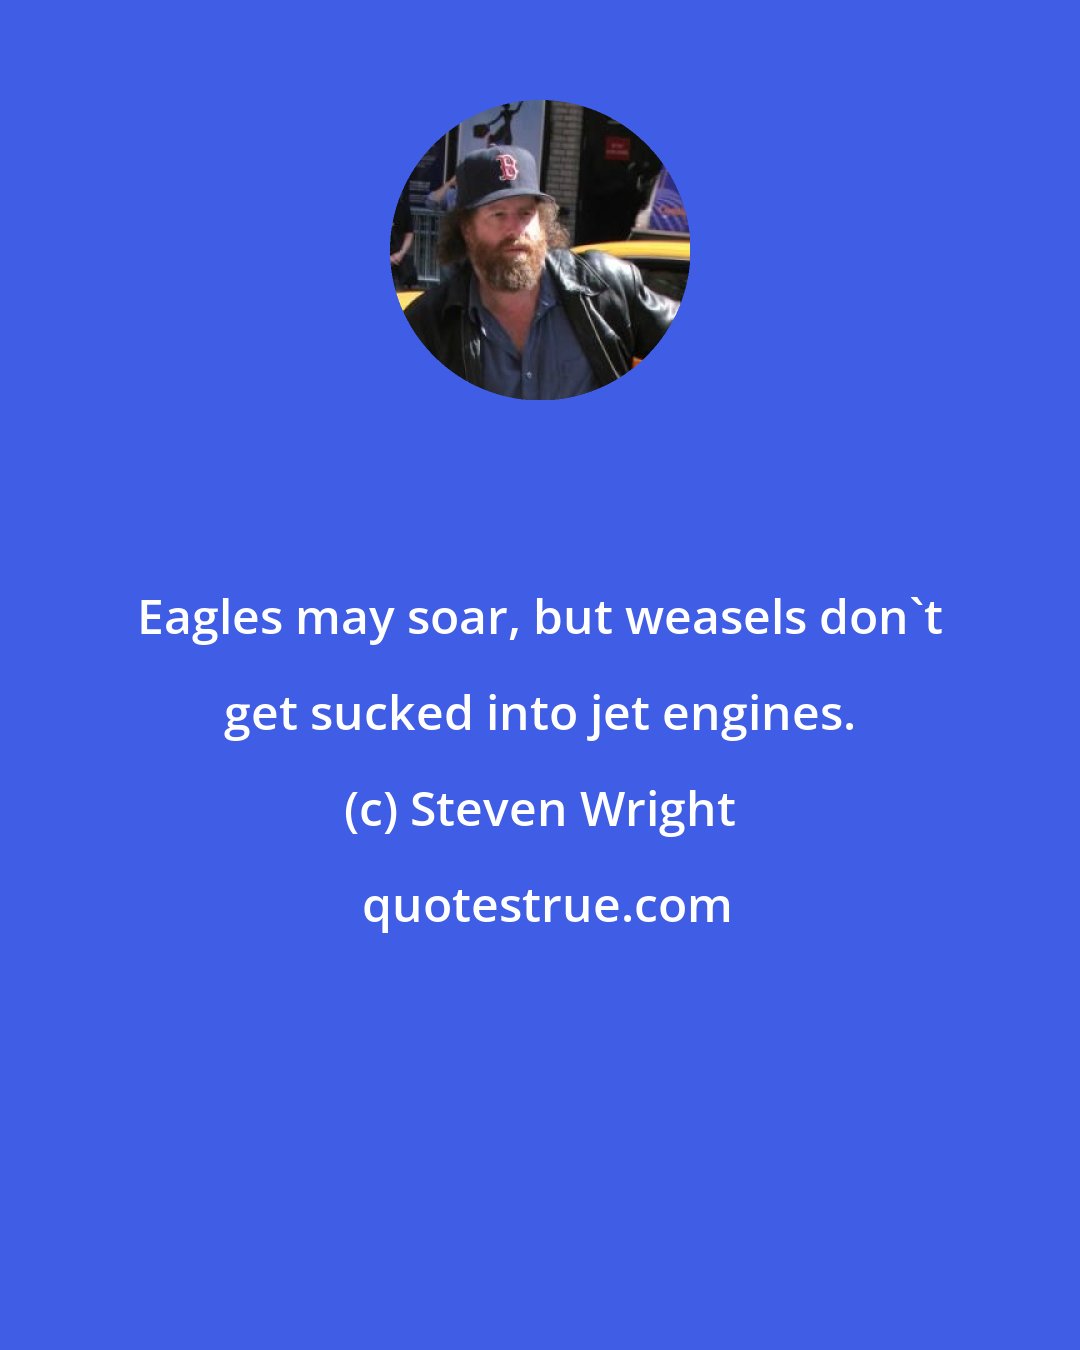 Steven Wright: Eagles may soar, but weasels don't get sucked into jet engines.